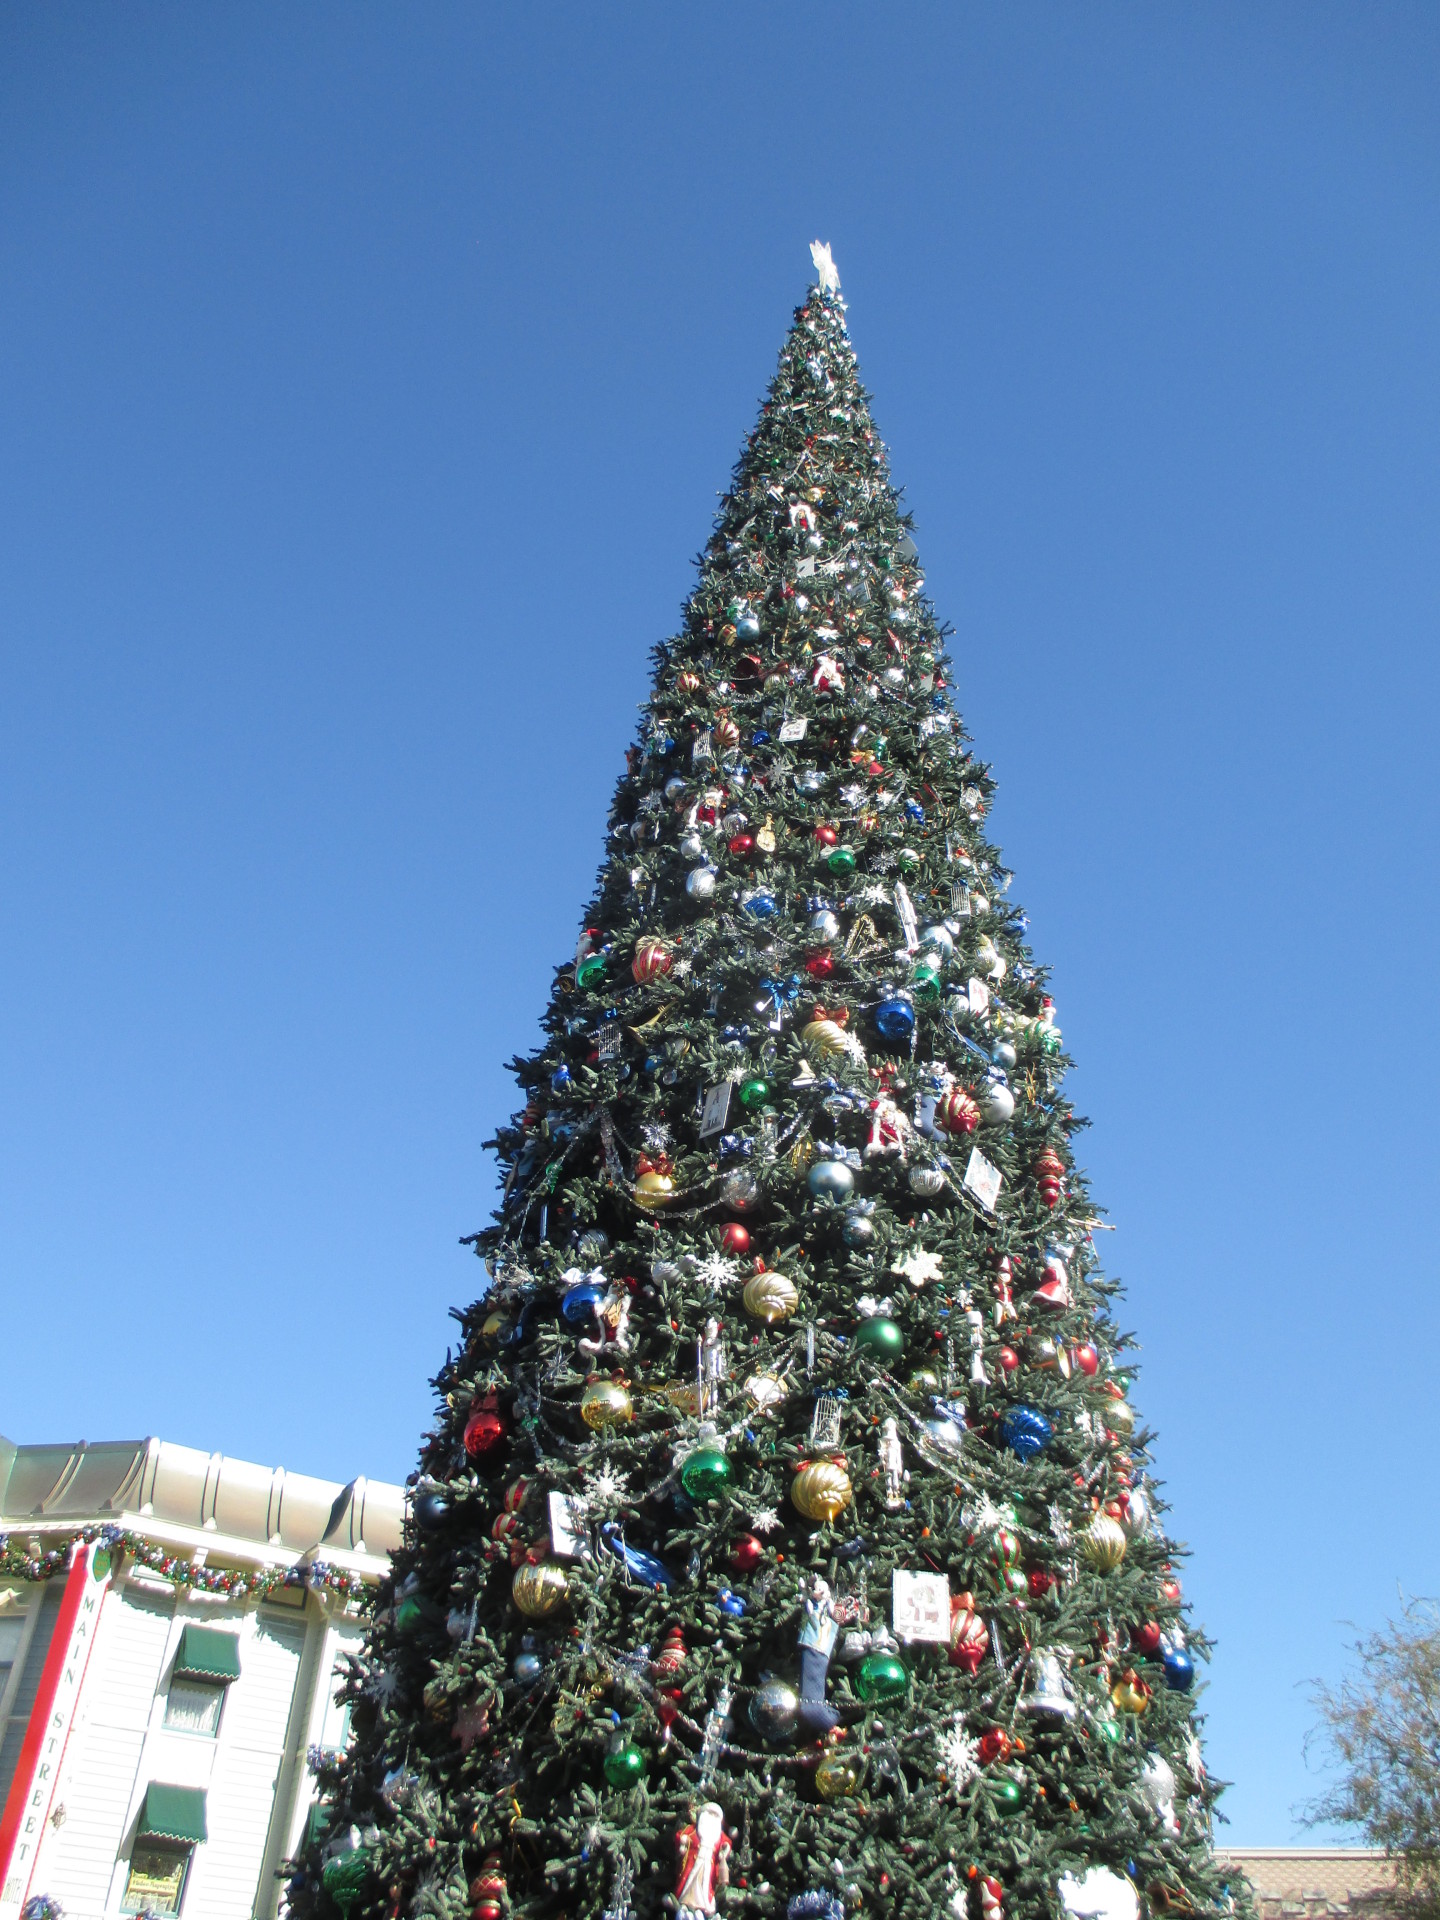 A Christmas Tree in Anaheim on a trip to Disneyland .